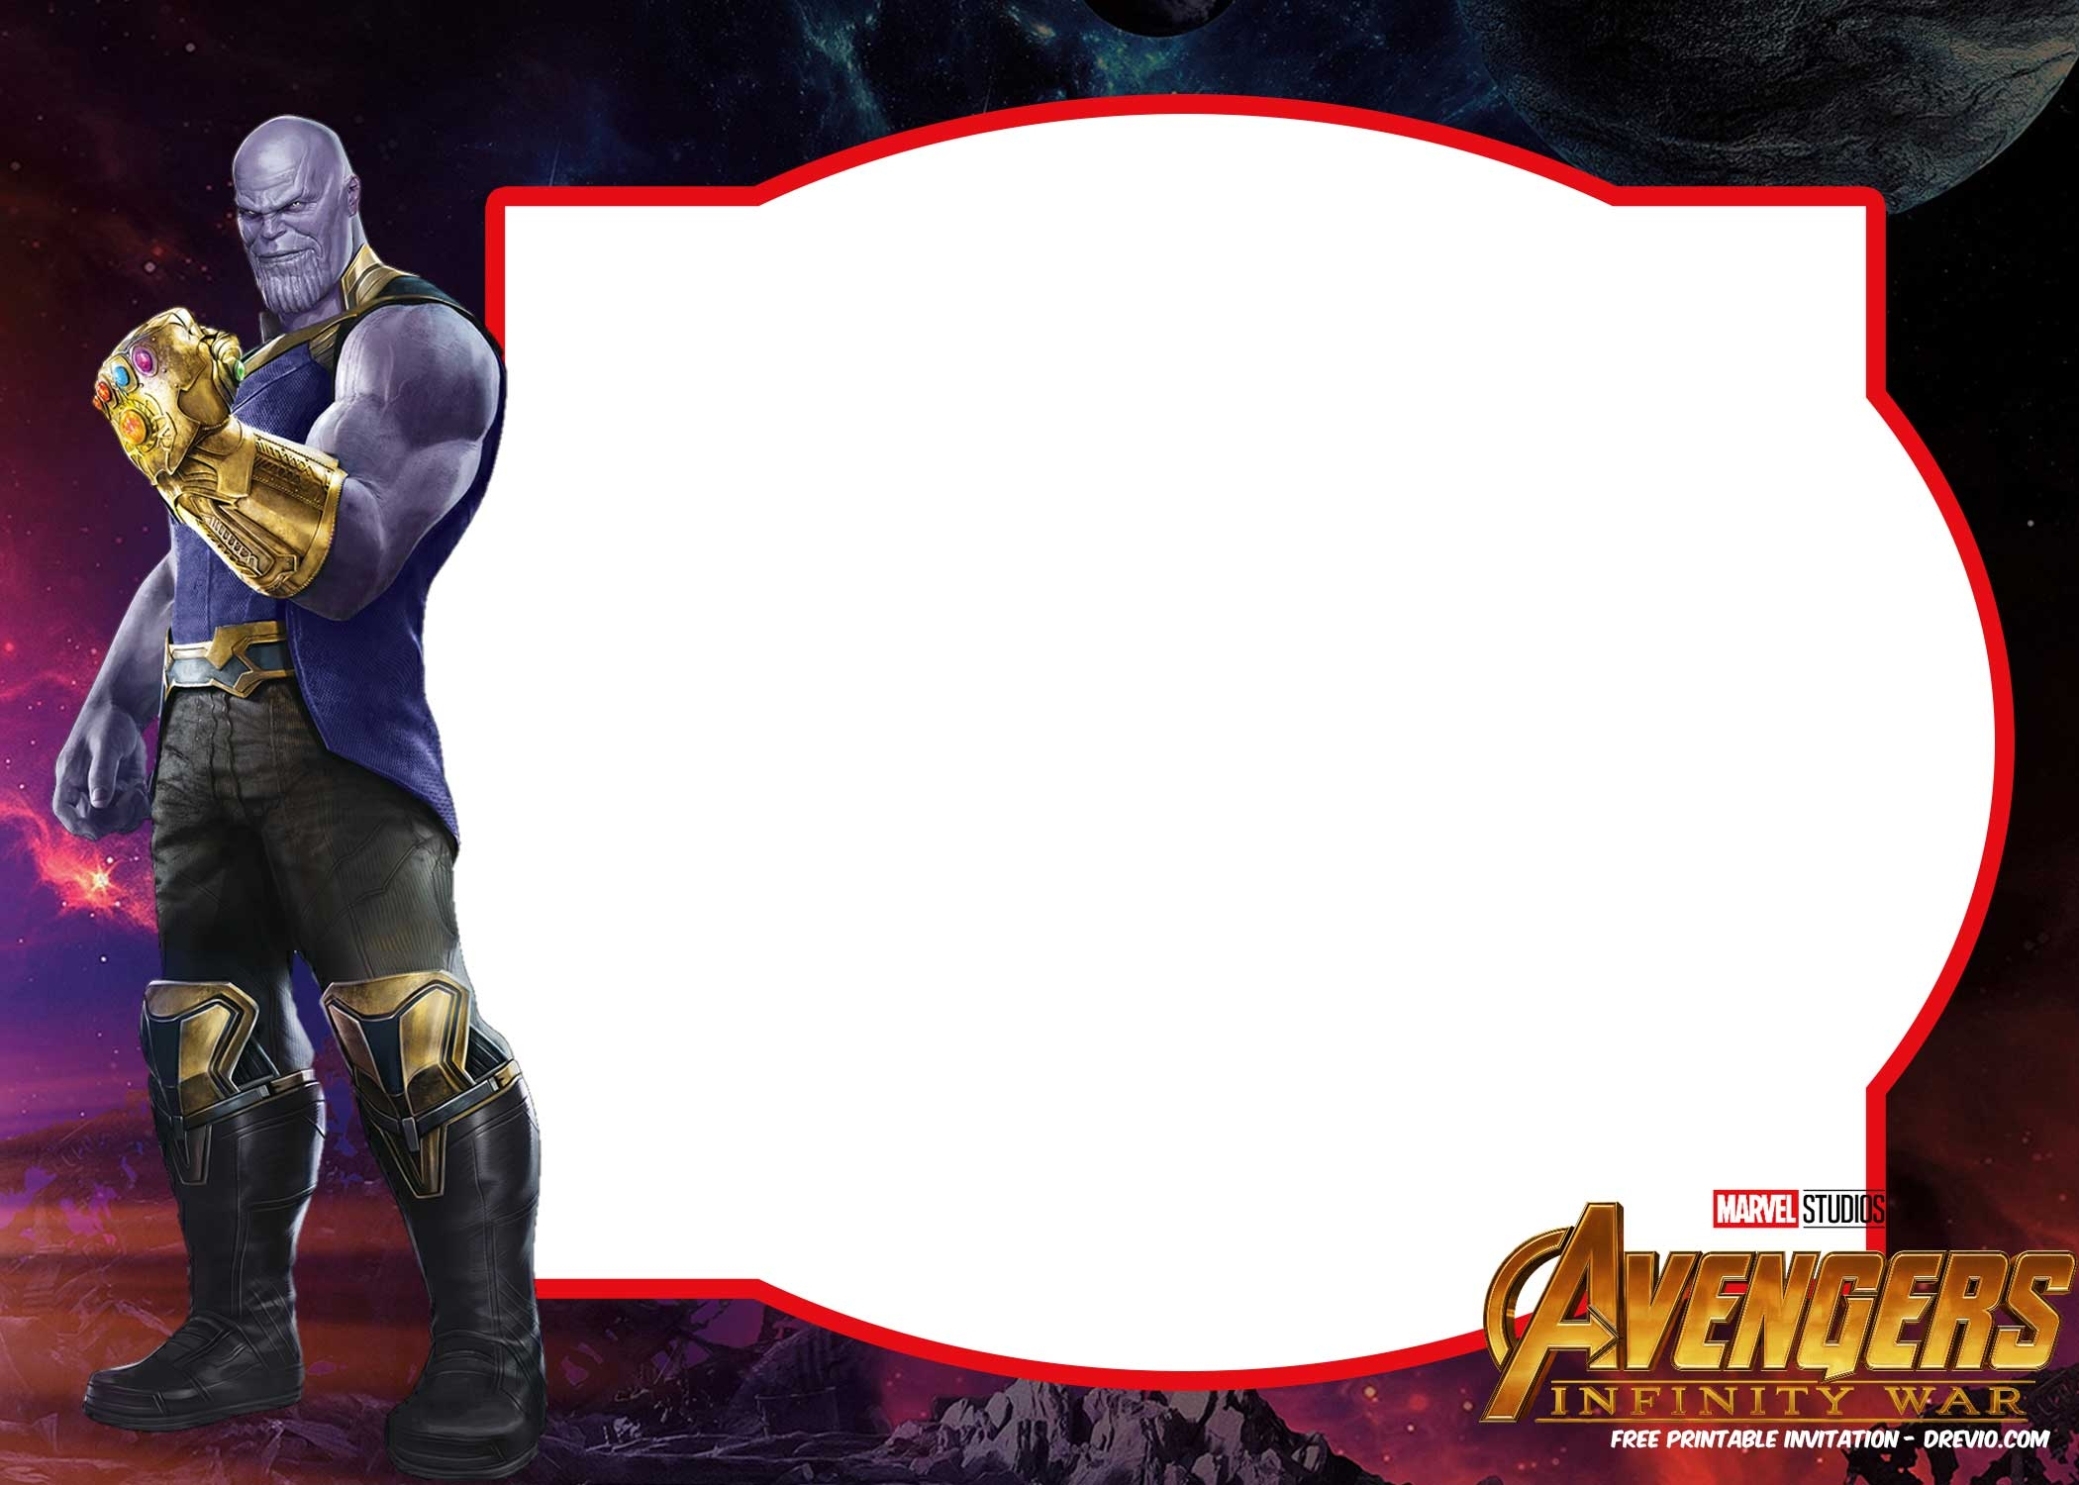 Free Avengers Infinity Wars Birthday Invitation Templates – All Pertaining To Avengers Birthday Card Template